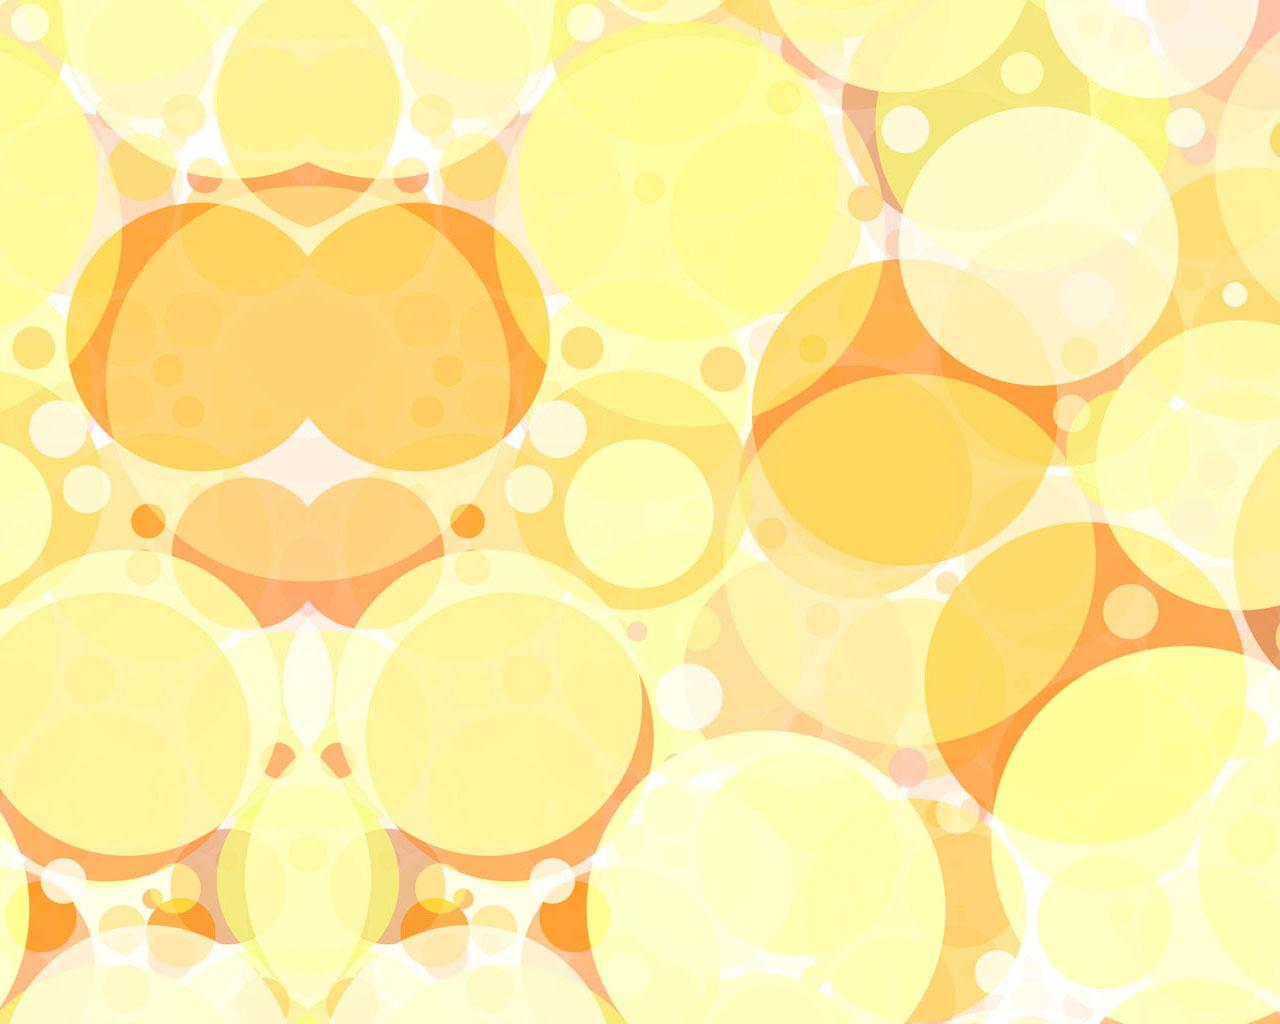 Classic Circle Patterns Background For PowerPoint